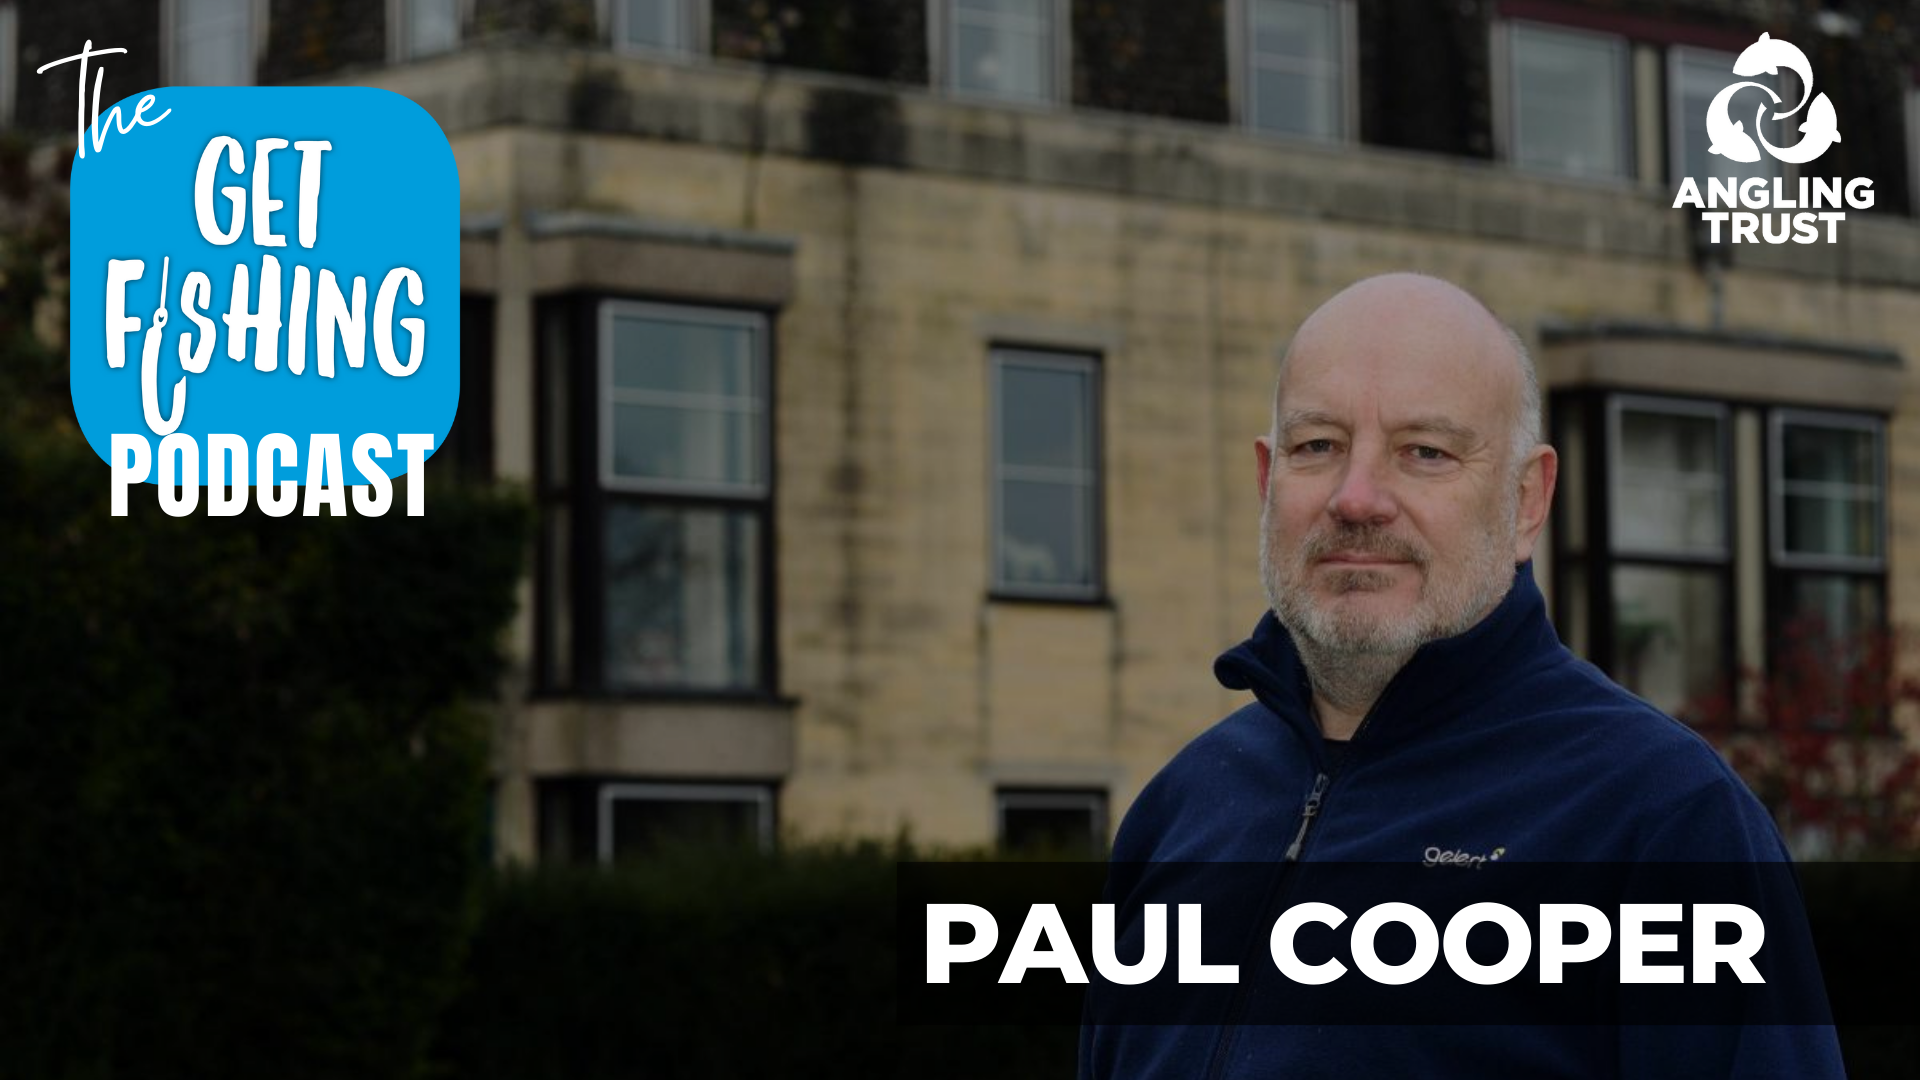 Get Fishing | Paul Cooper - EP. 10 - The Get Fishing Podcast with Jimmy Willis